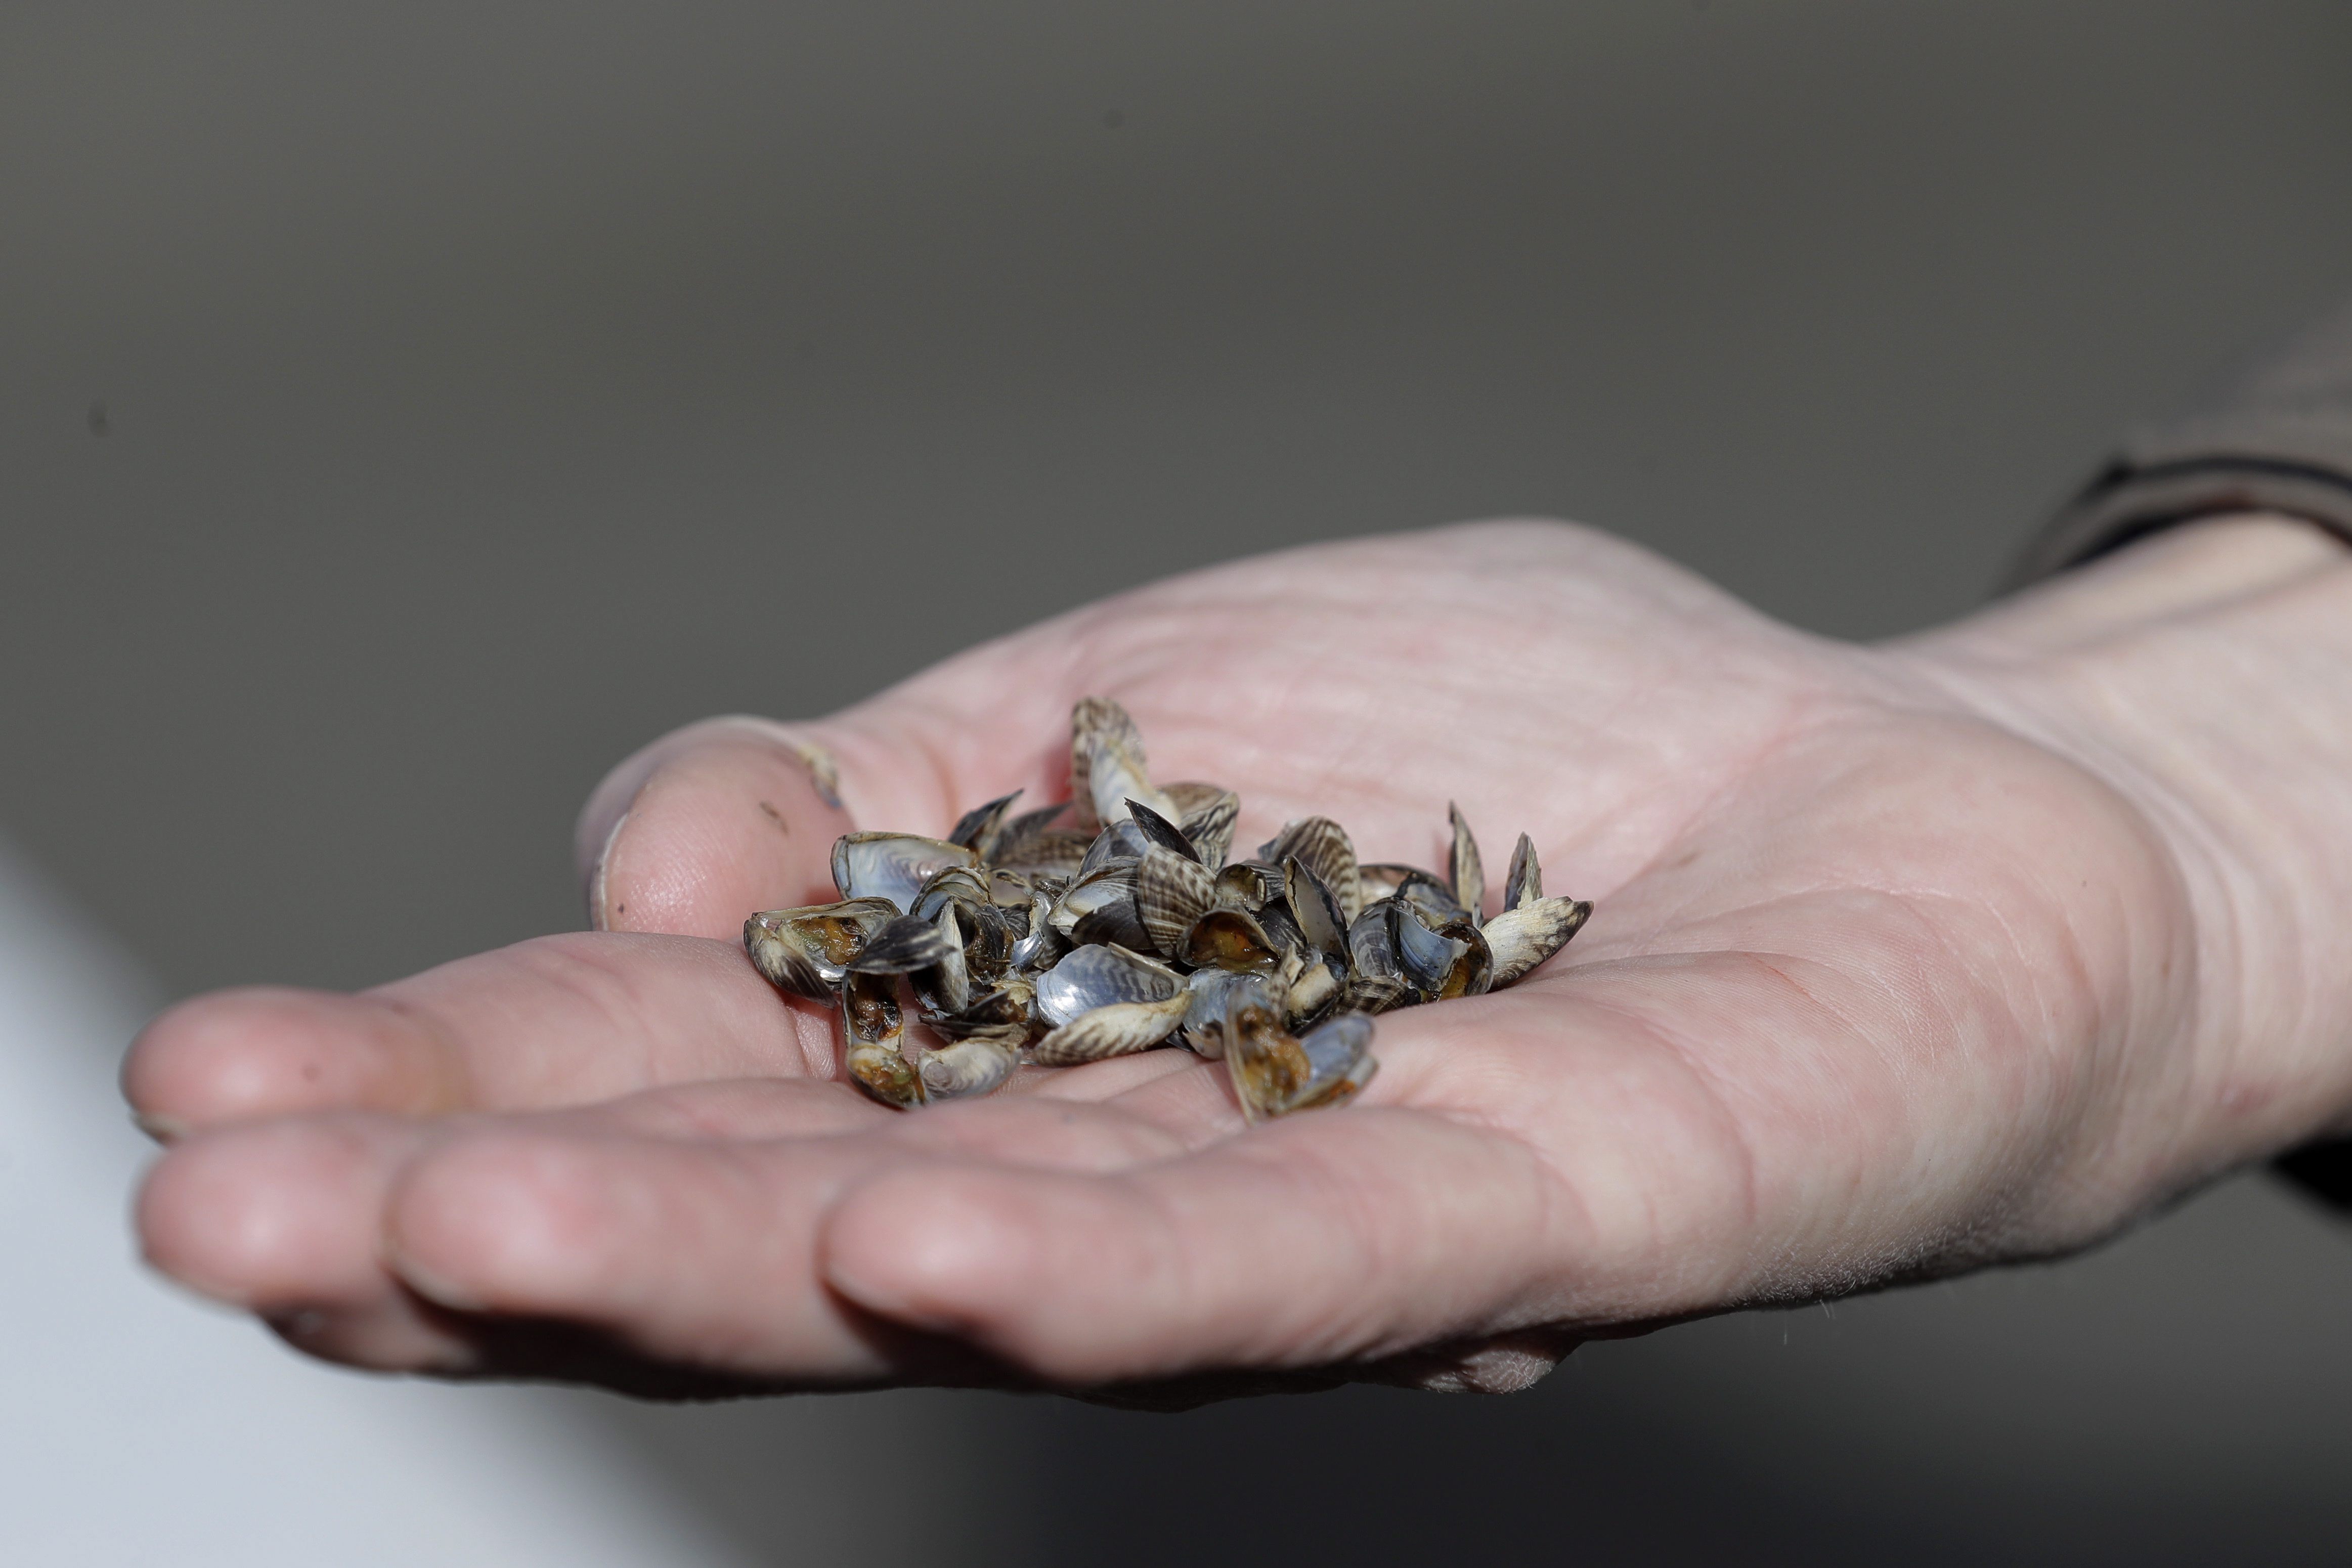 Okanagan Basin Water Board wants more federal support to combat invasive mussels